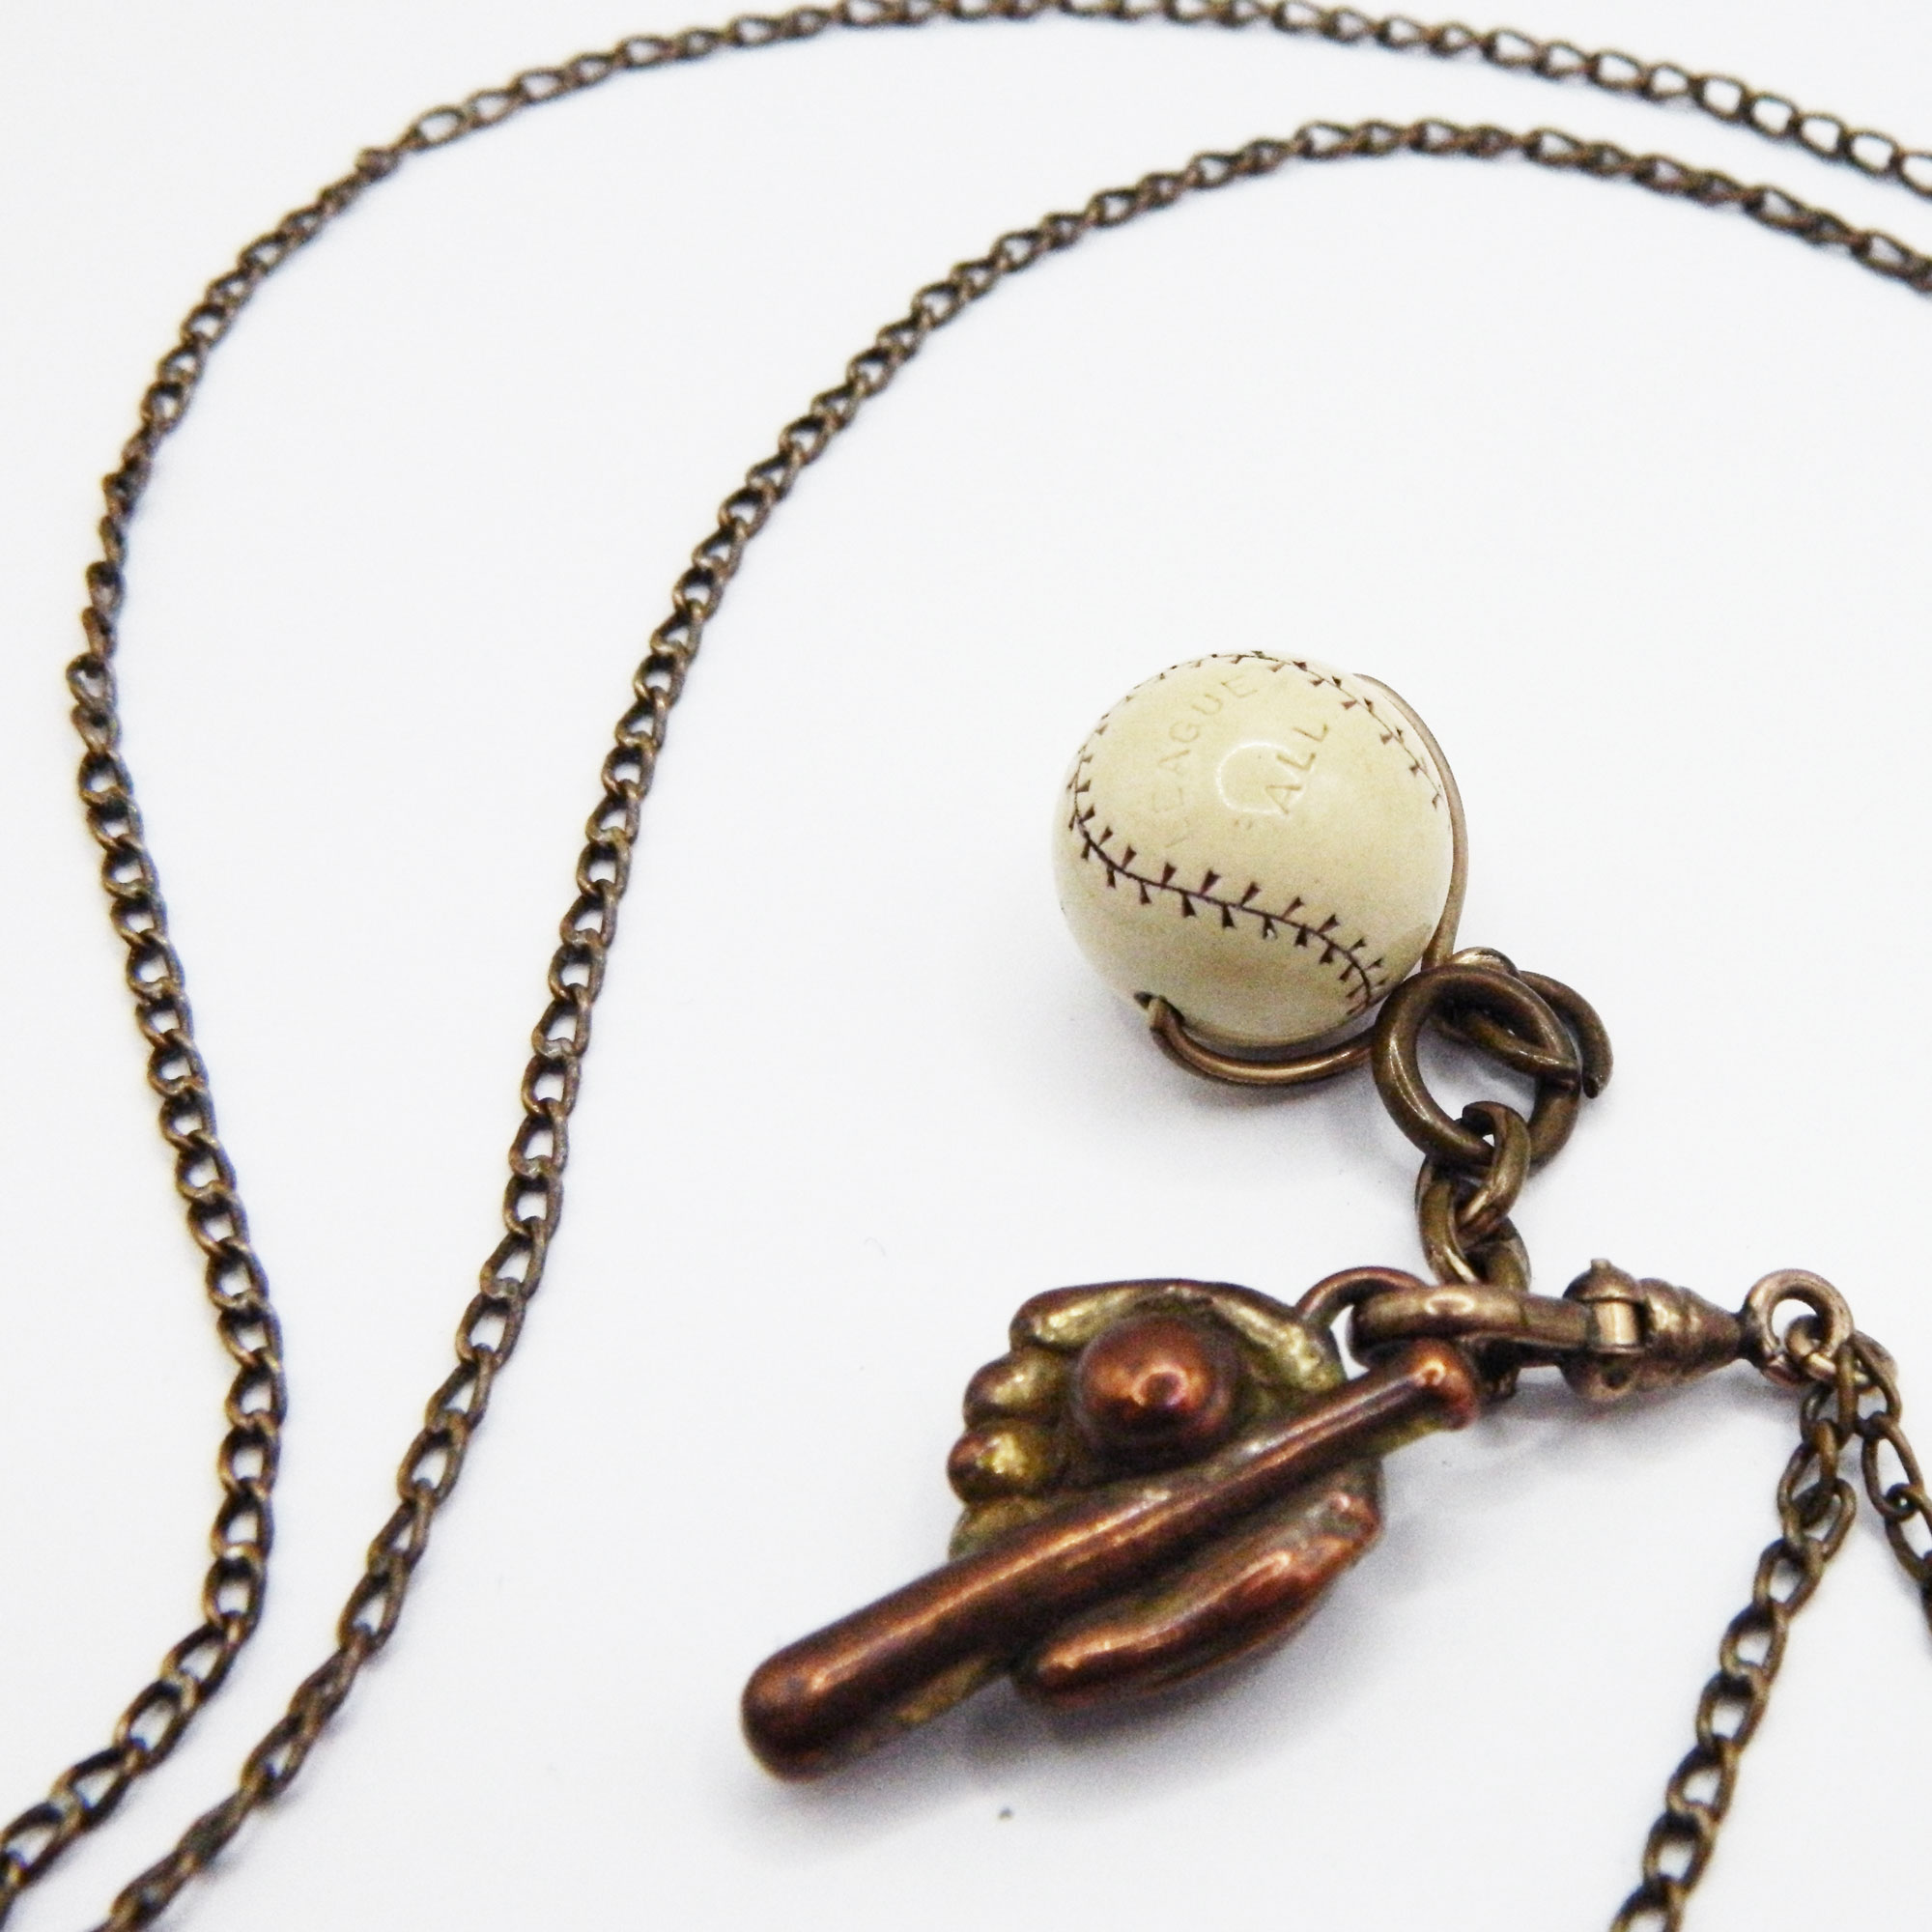 Baseball watch fobs and chain